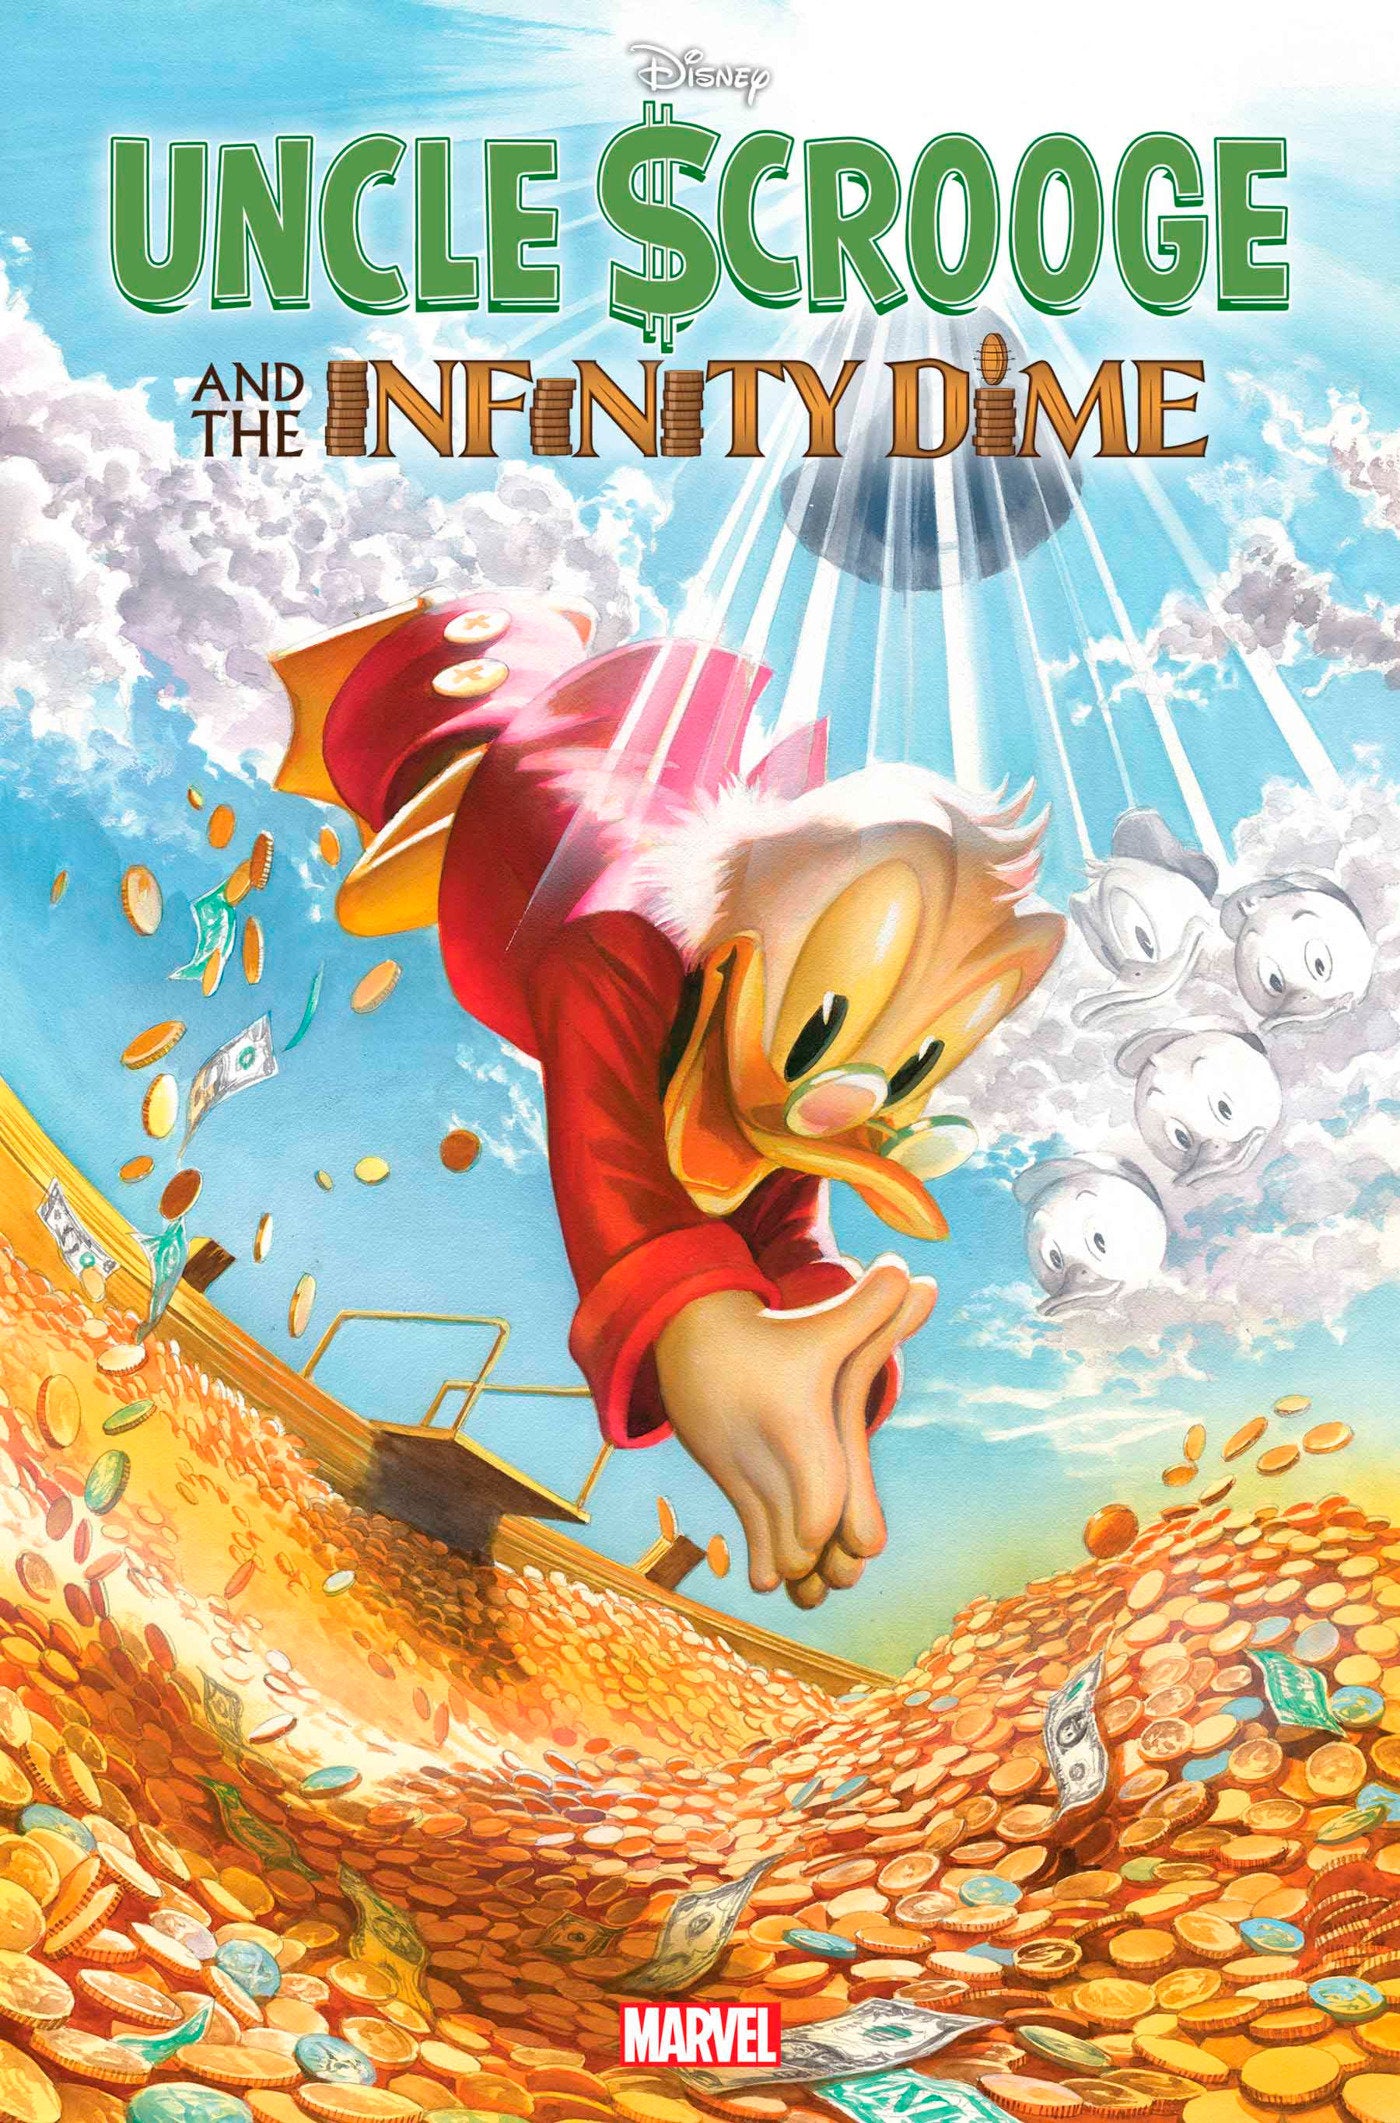 UNCLE SCROOGE AND THE INFINITY DIME #1 ALEX ROSS COVER A